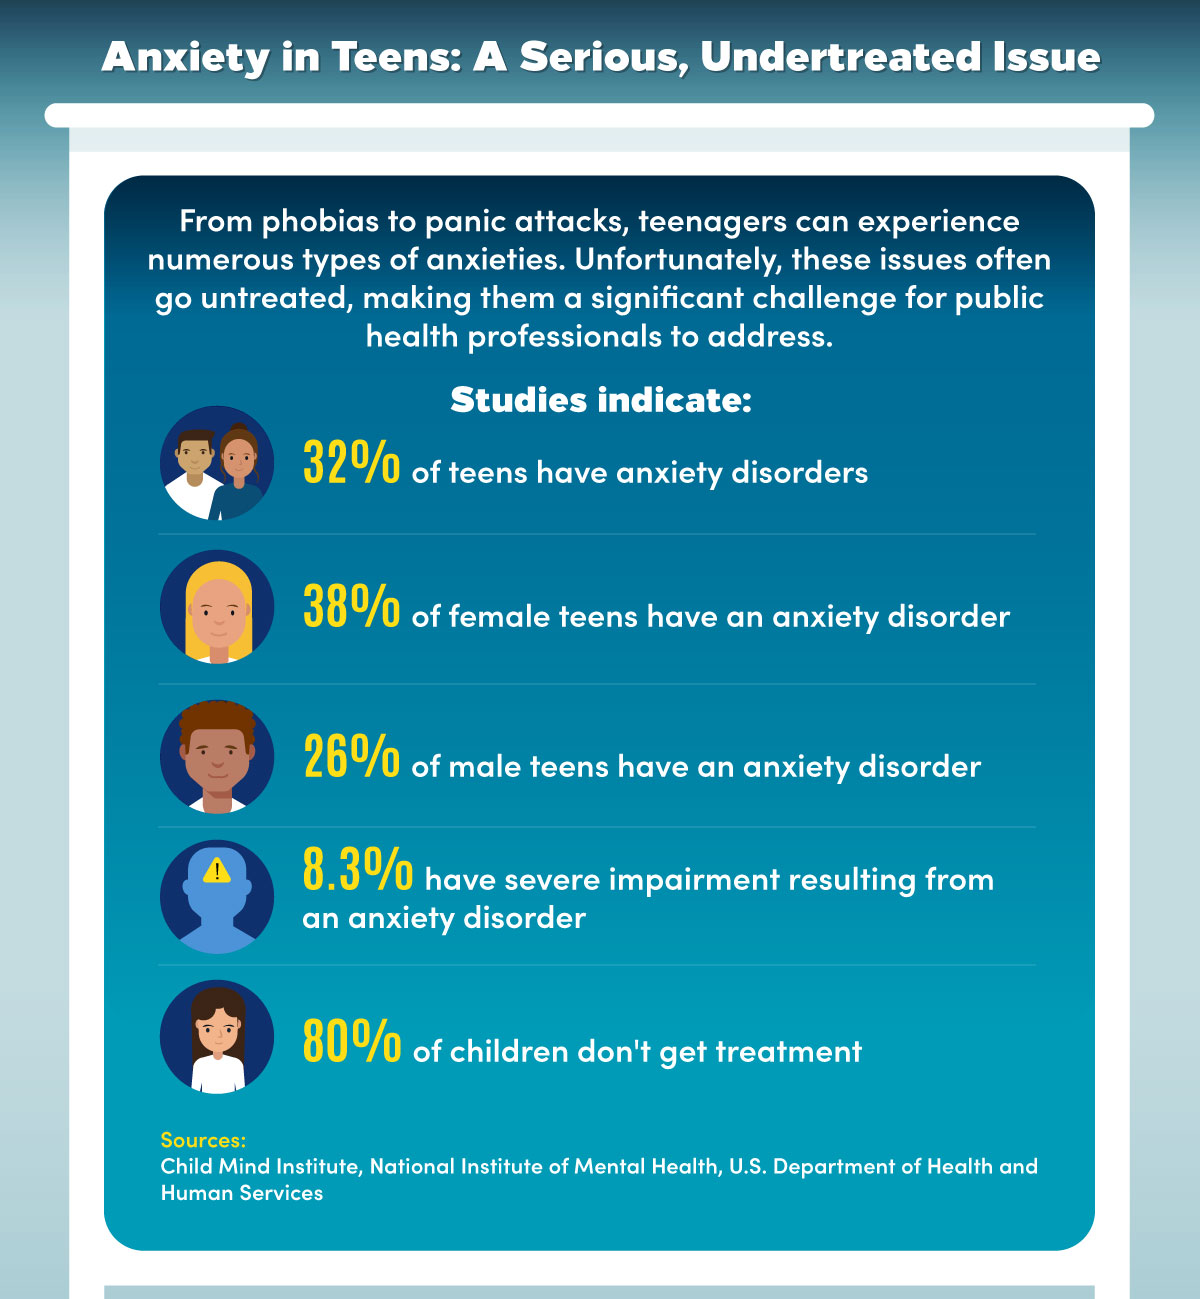 Studies indicate the anxiety in teens is a serious, undertreated issue.